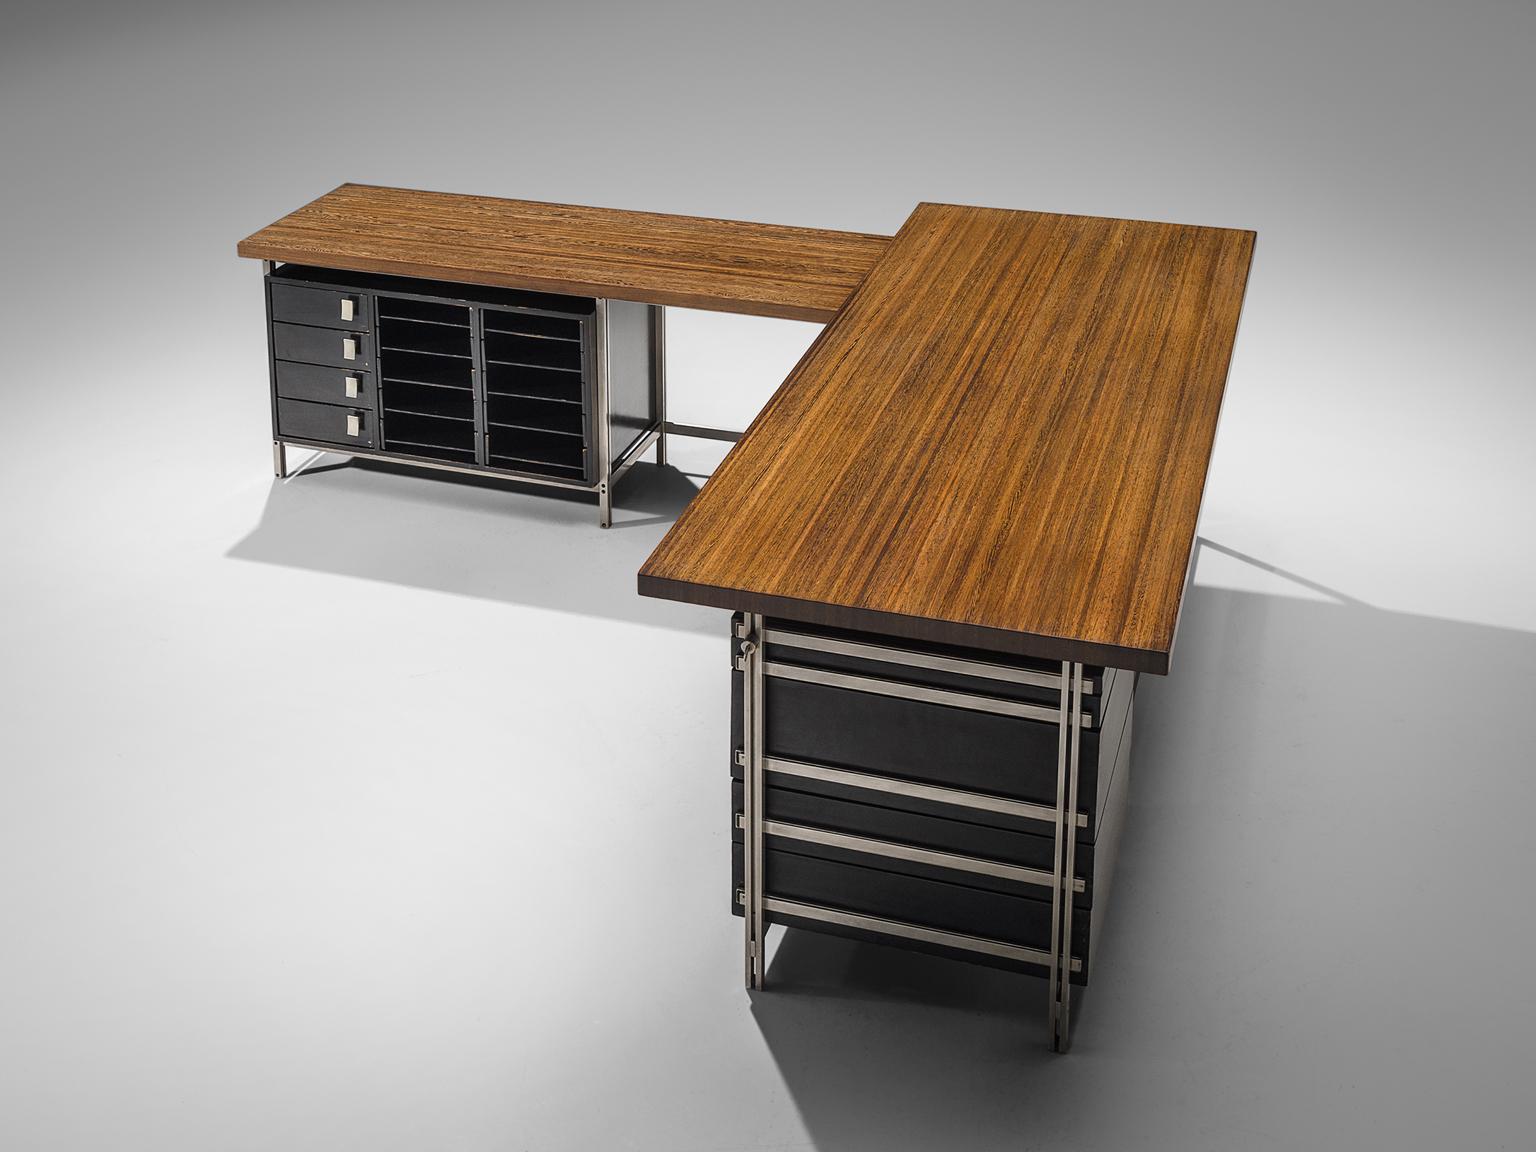 Jules Wabbes, writing desk with drawer pieces, wenge wood tabletop , chrome frame, drawers black, Belgium, 1960s

This corner desk is designed by Jules Wabbes, The table is executed with a solid wenge wooden top, made out of tangentially-sawn wenge